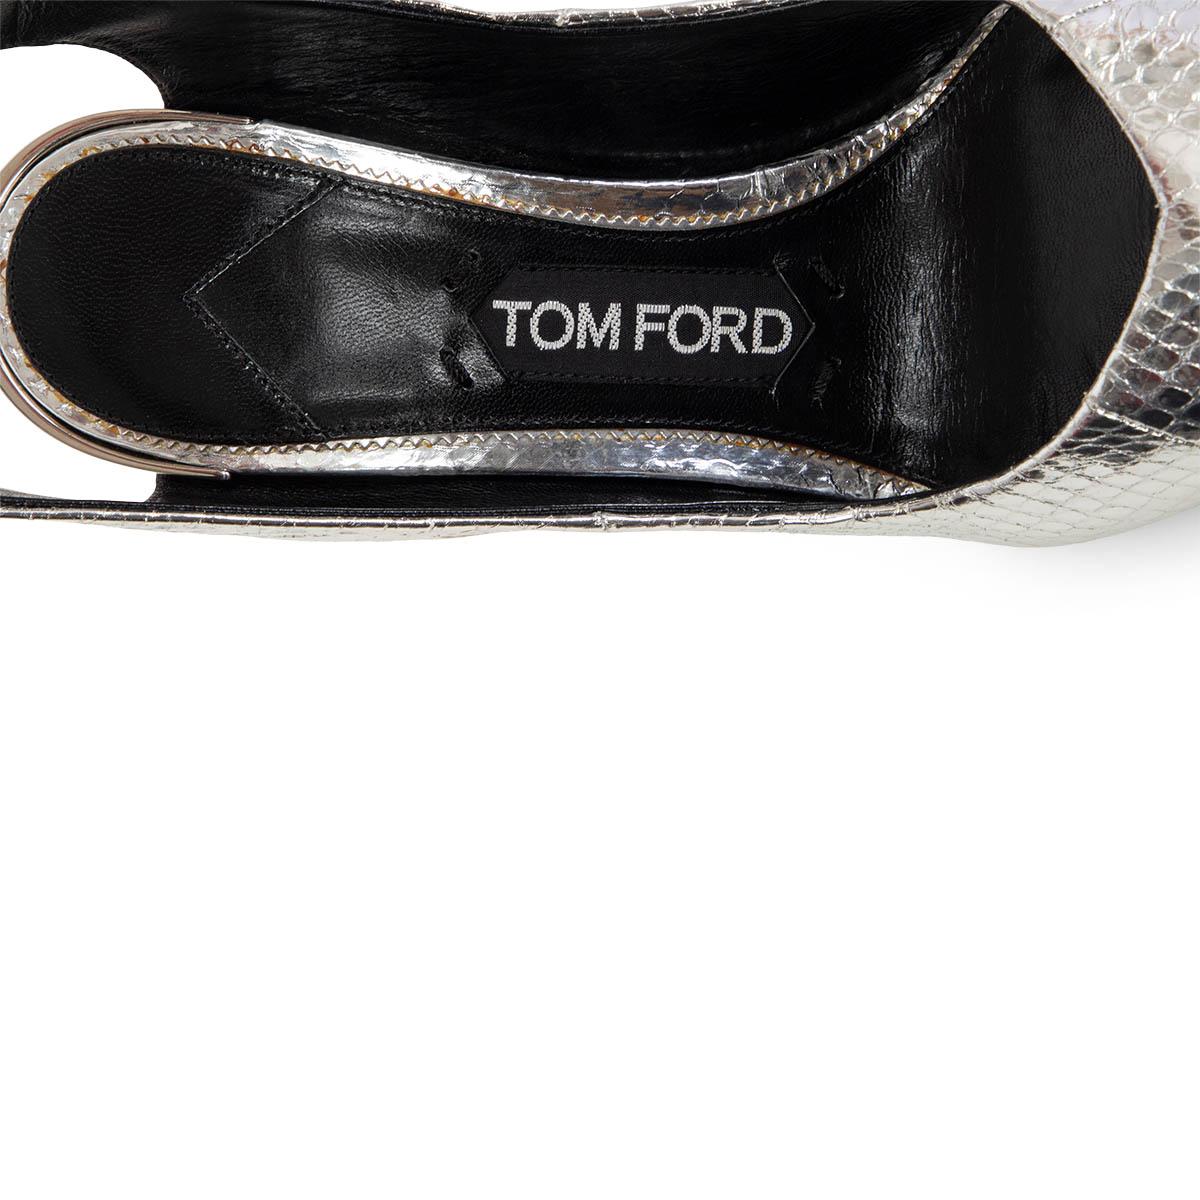 TOM FORD metallic silver PYTHON Wedge Ankle Strap Pumps Shoes 37 In Excellent Condition For Sale In Zürich, CH